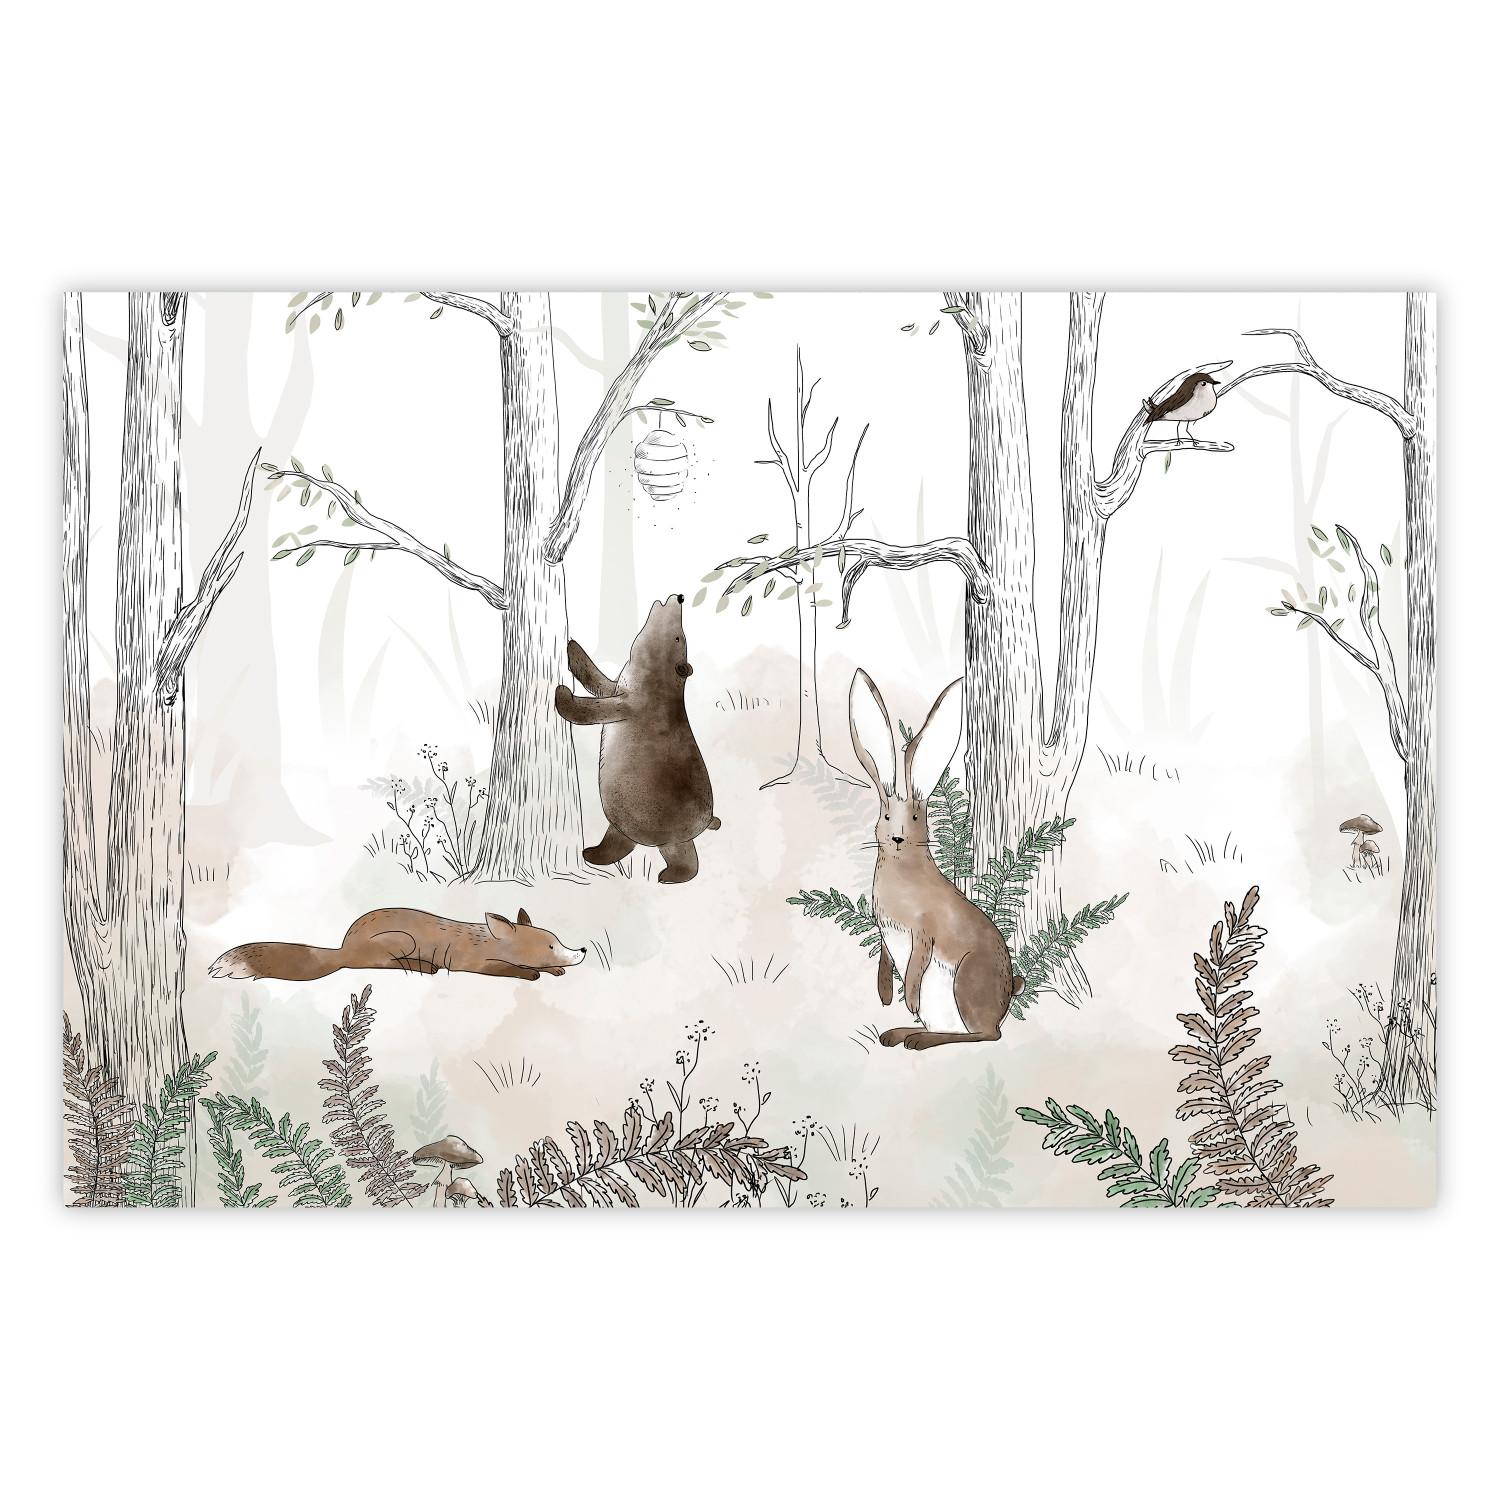 Poster Forest Animals - Drawn Forest with Watercolor Ferns